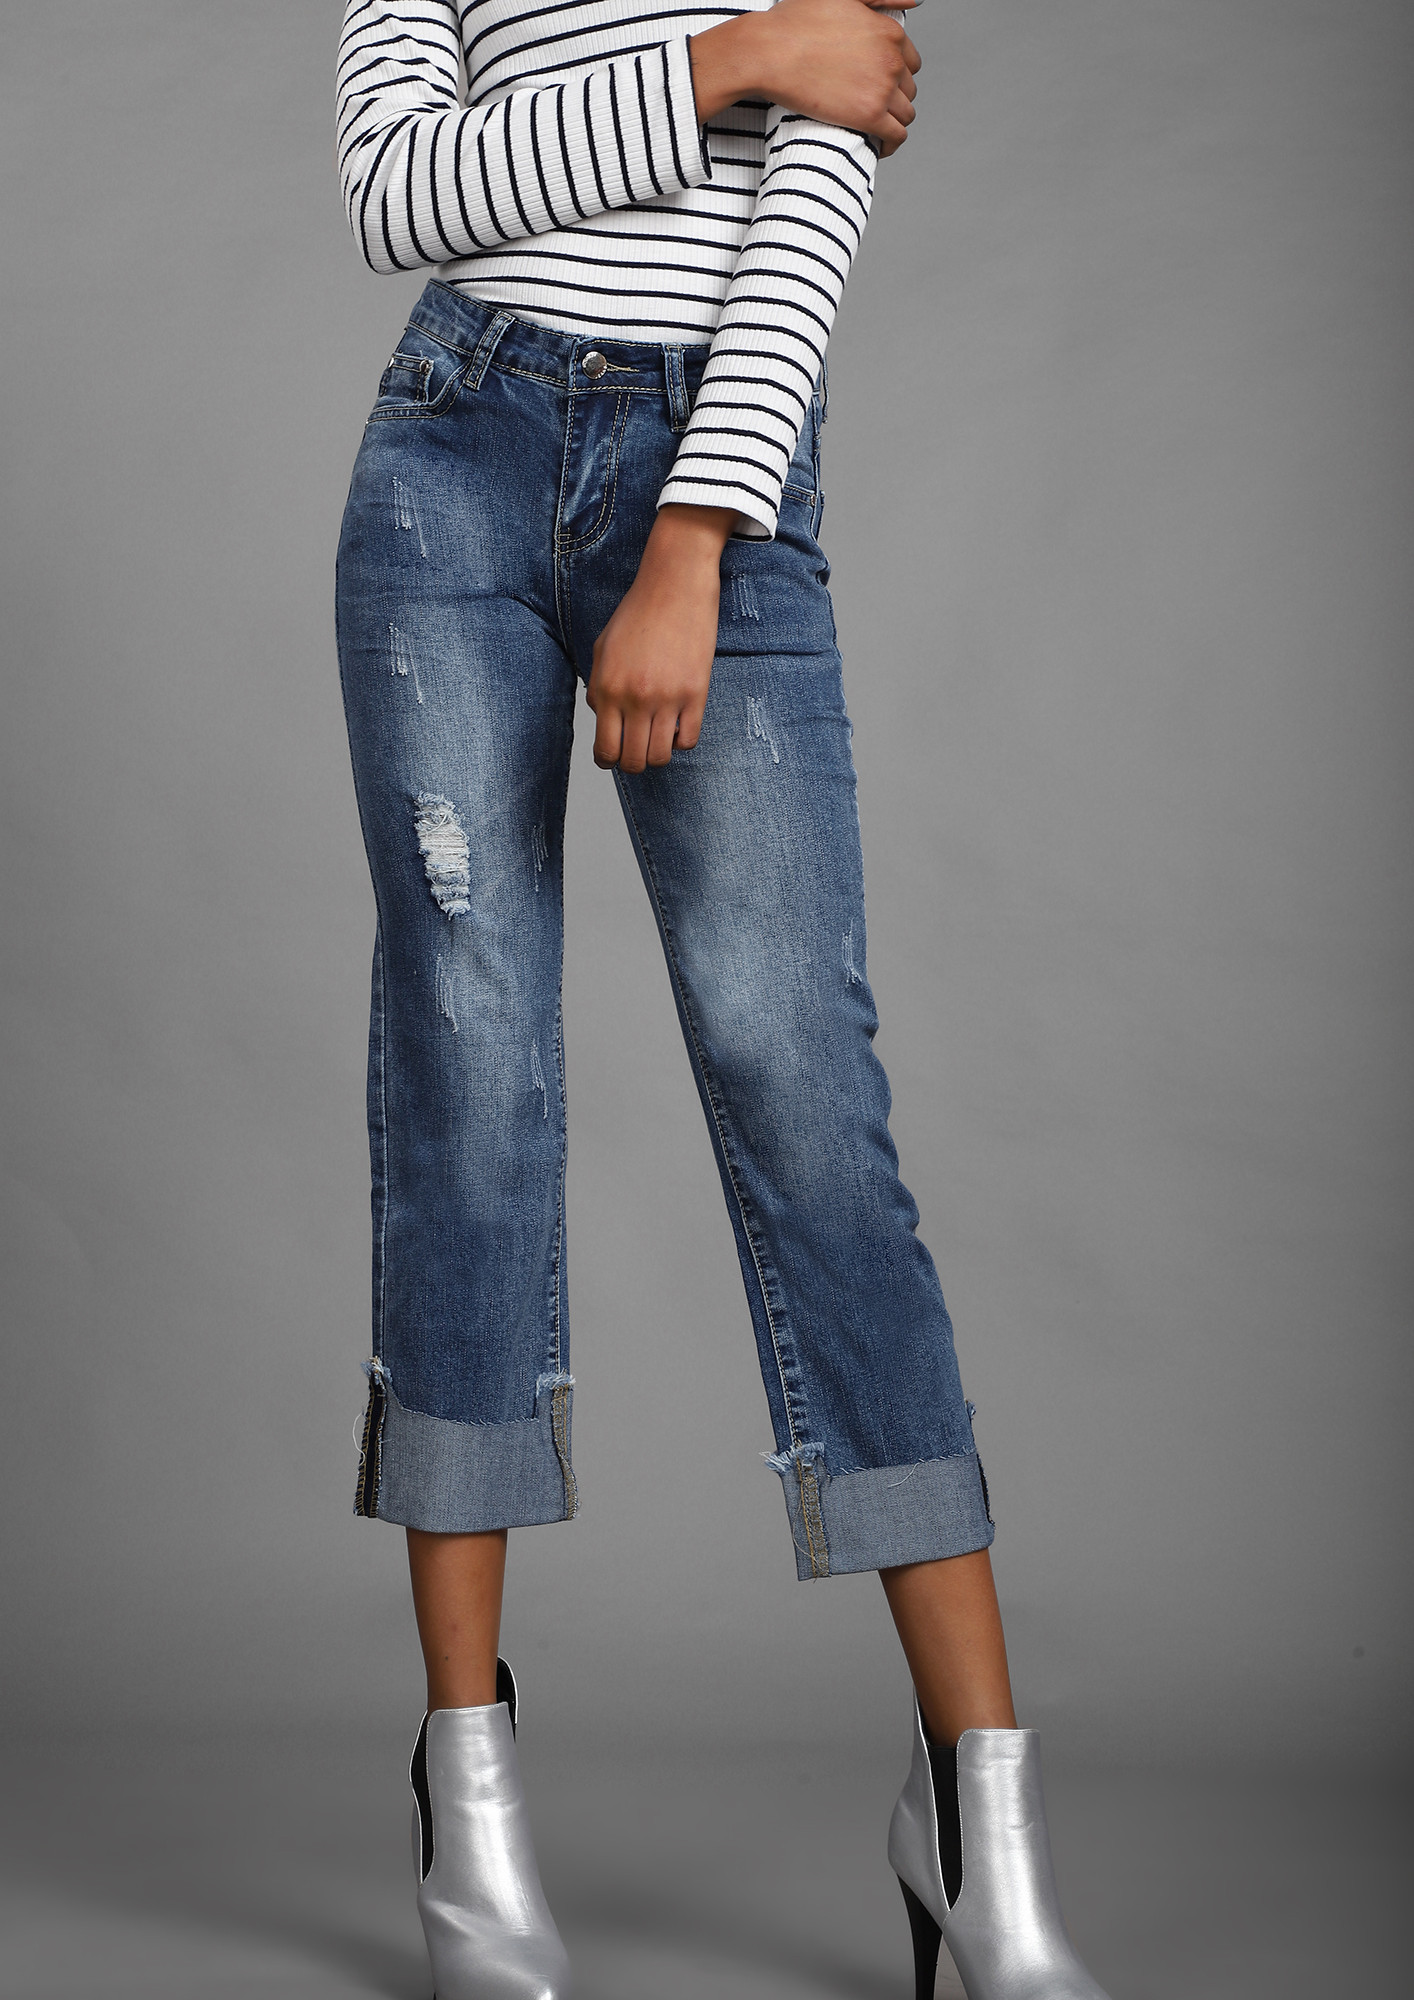 BORROWING FOR THE MOMENT BLUE BOYFRIEND JEANS